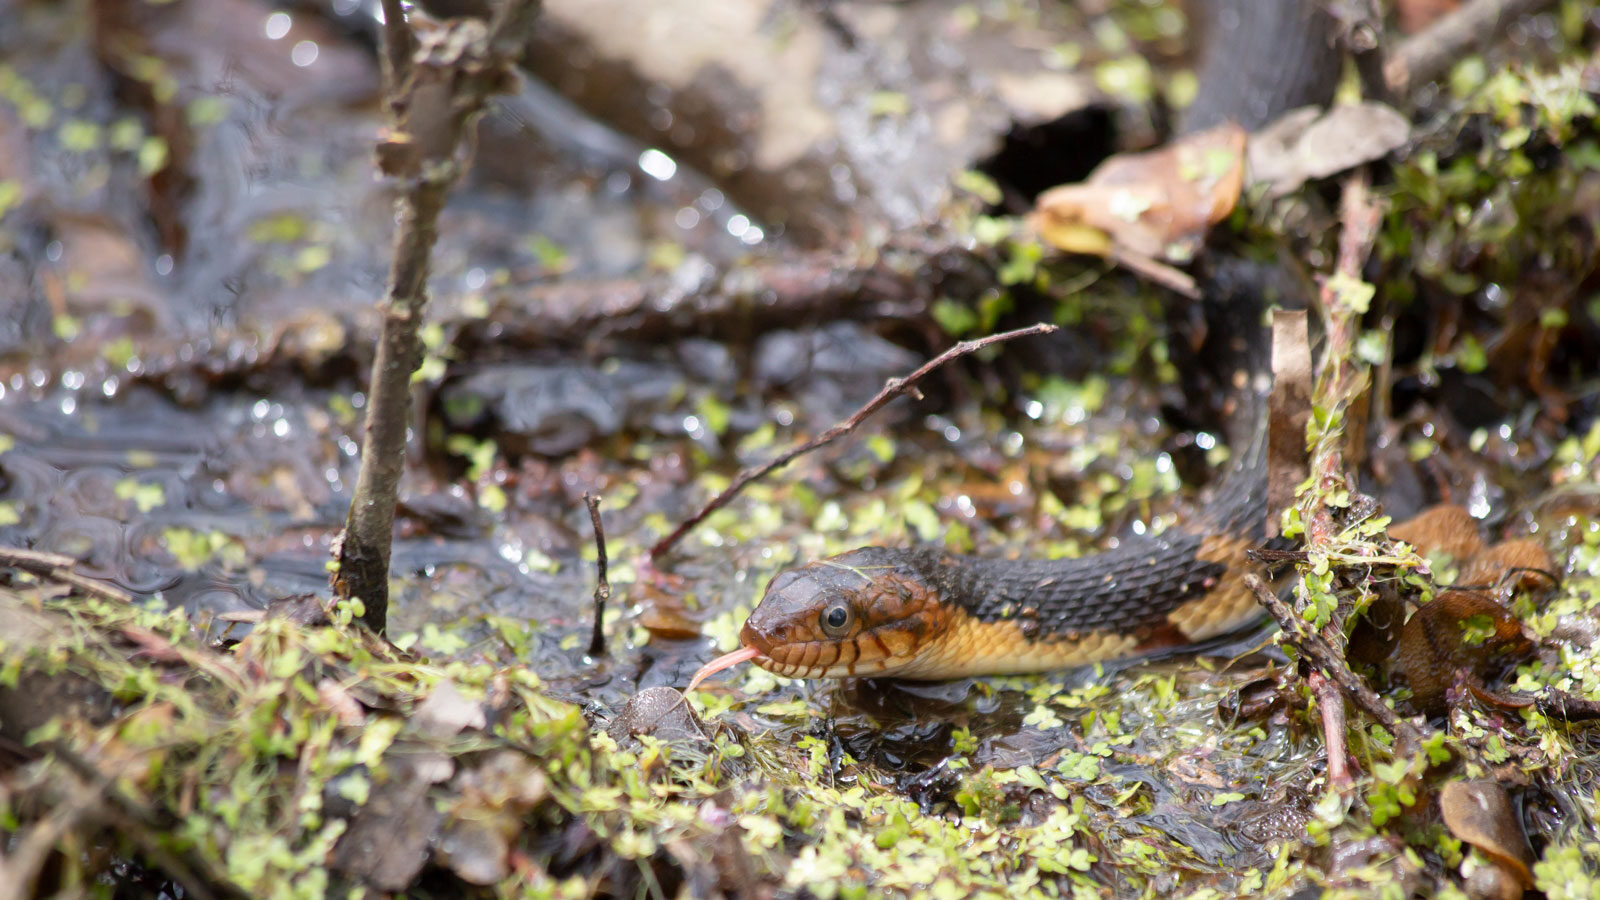 Broad-banded watersnake swimming in murky, shallow water